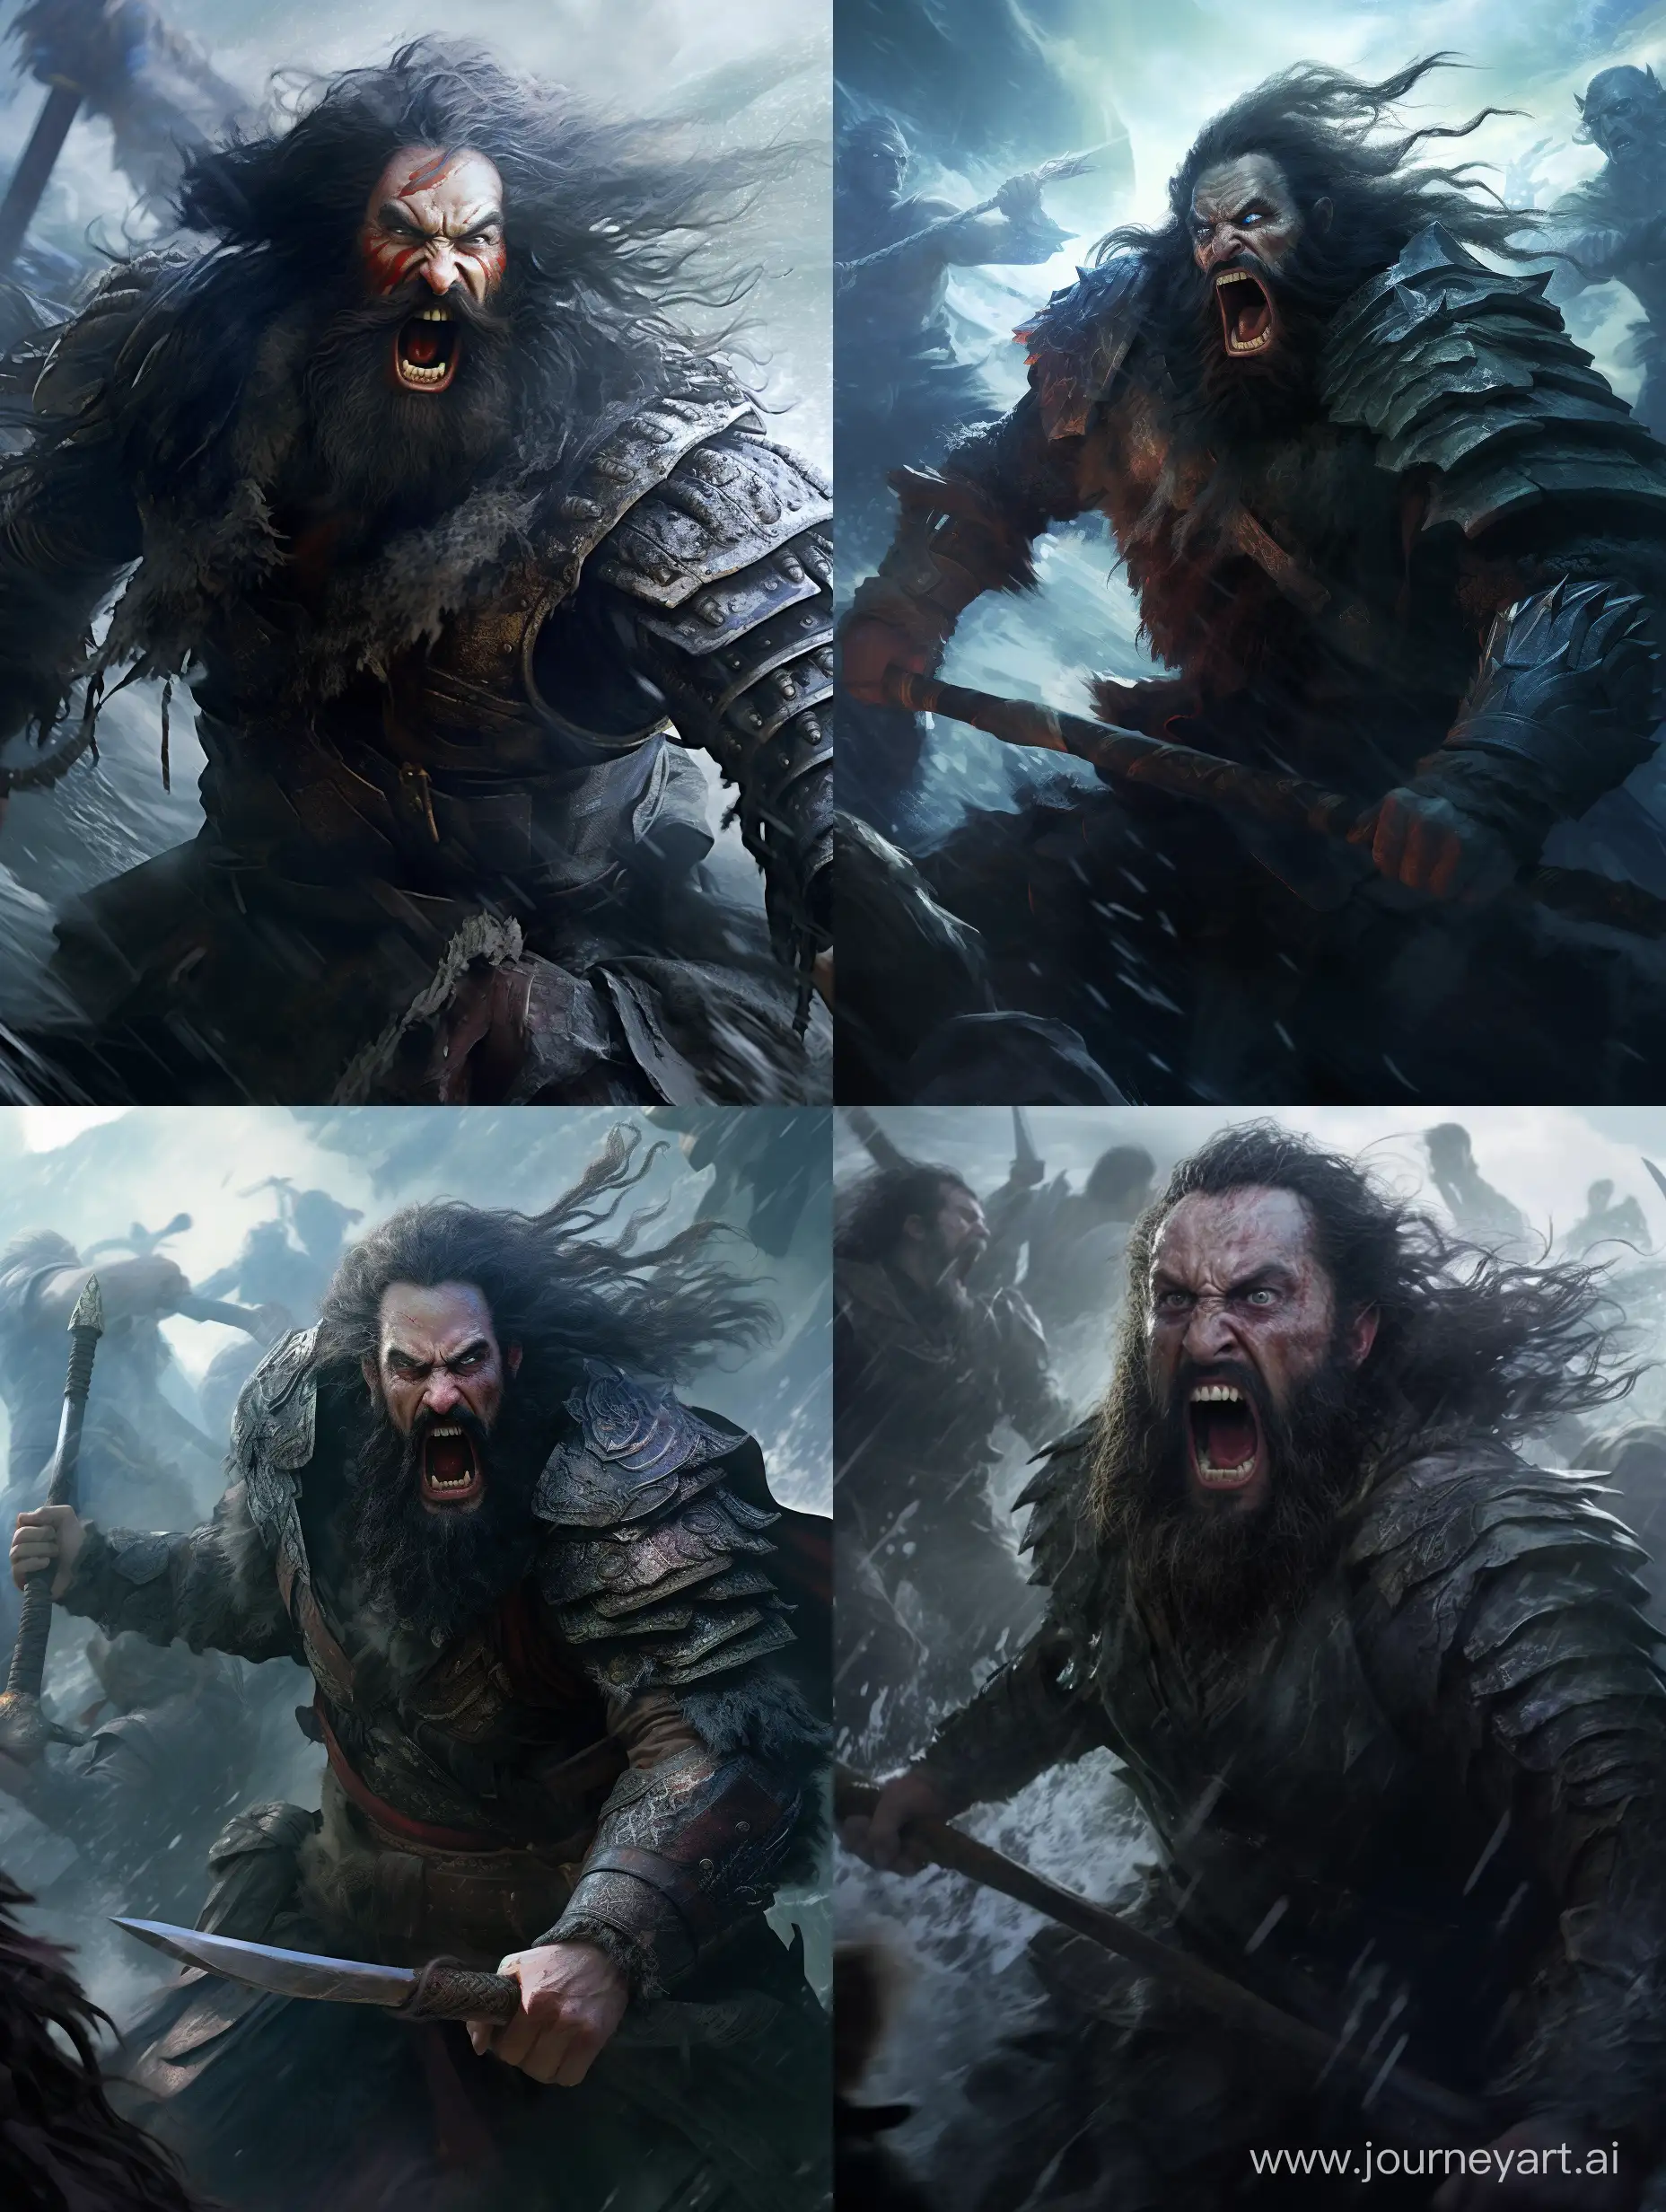 A hyper-realistic and highly detailed image that captures the essence of Blackbeard attacking other ships in a war scene. The atmosphere is tense and chaotic, with the lighting emphasizing the destruction and the action. The color temperature is cool, with a hint of blue, evoking the cold waters of the Atlantic. Blackbeard is shown in full body, with a fierce expression on his face as he leads the attack. The other ships are in the background, with smoke and debris filling the air. The image has a cinematic quality, evoking the excitement and danger of a scene from a high-budget pirate movie. The composition is dynamic, with the focus on Blackbeard and his crew as they engage in a fierce battle with their enemies. The background is highly detailed, with intricate details in the ships and the waves of the ocean. The image is in 12K resolution, allowing for maximum detail and clarity, making it a perfect fit for large screens and immersive experiences. --ar 3:4